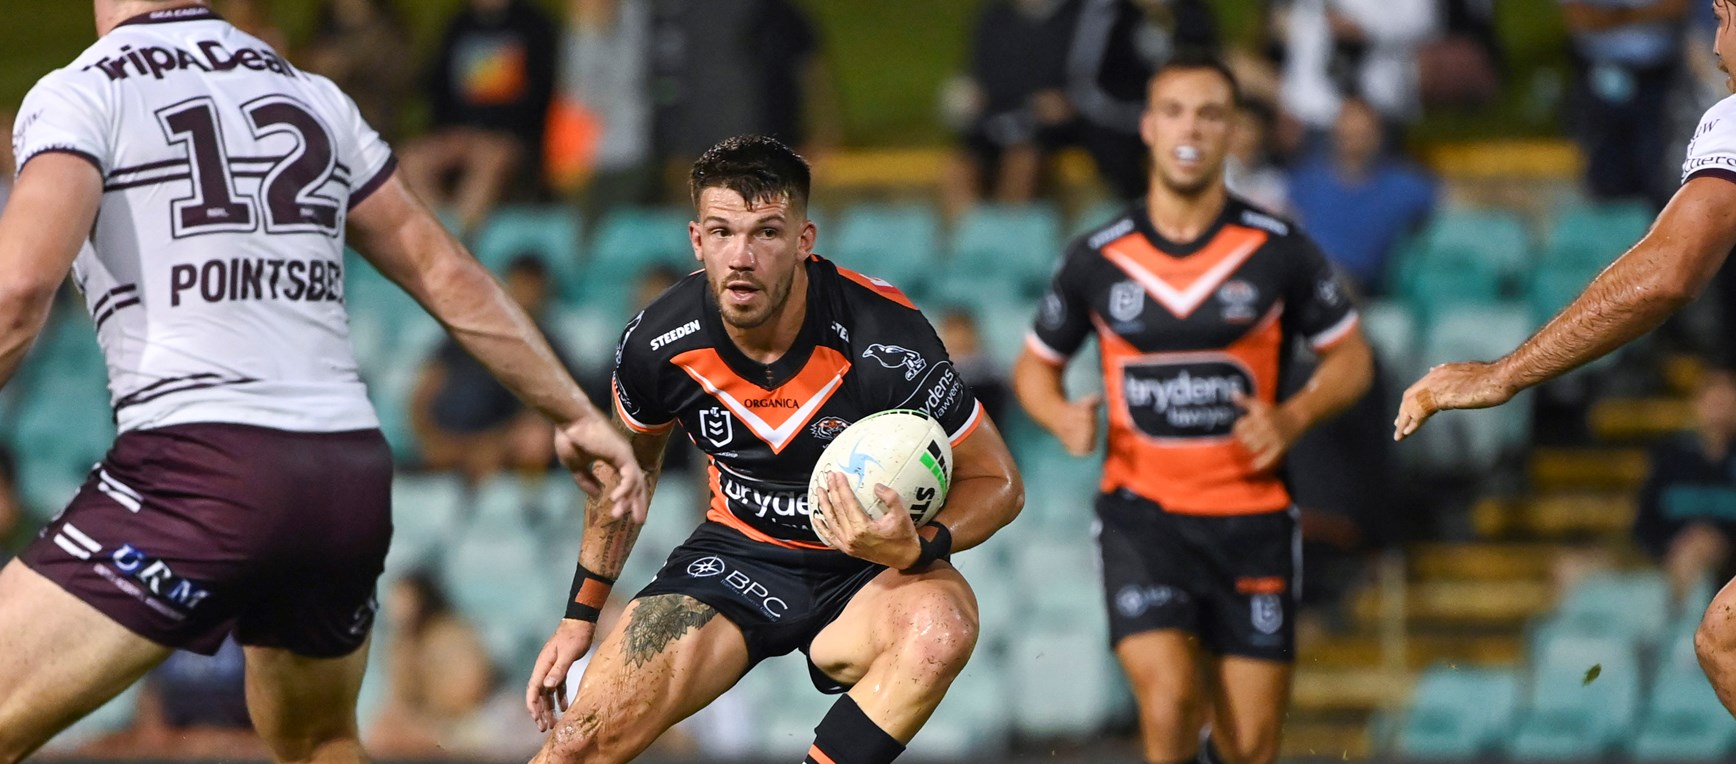 Gallery: Trial 1 vs Manly